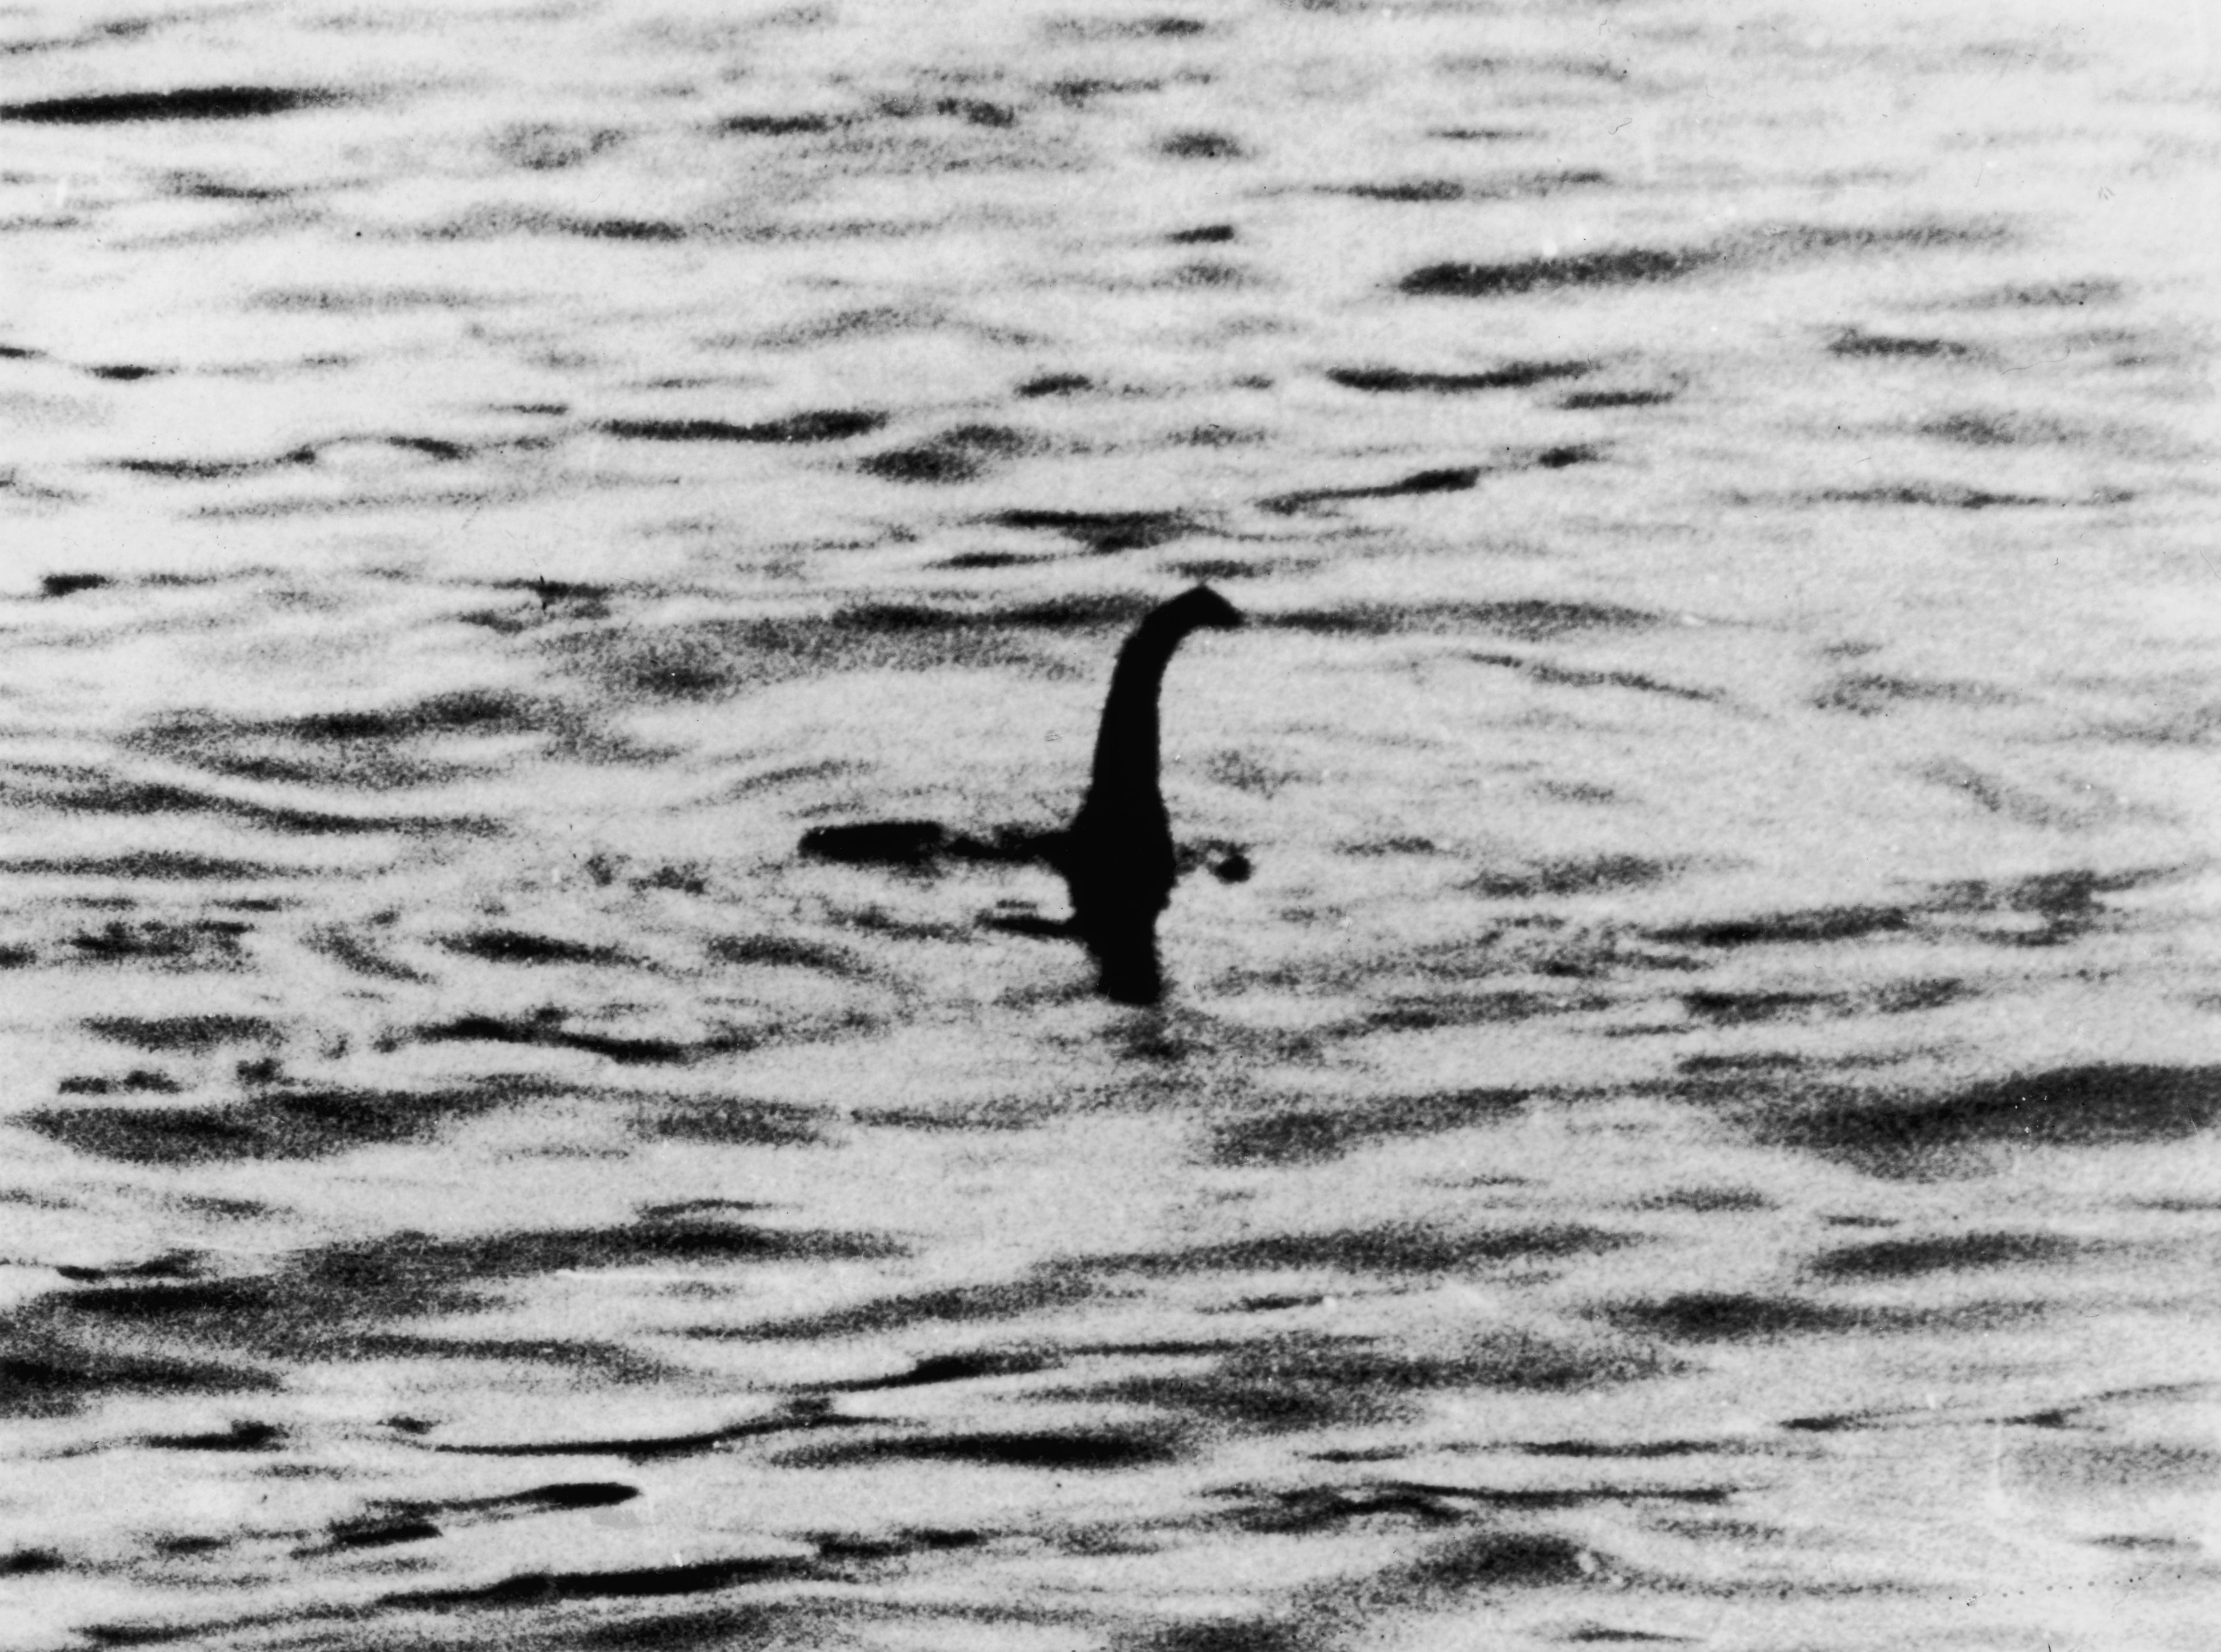 A view of the Loch Ness Monster, near Inverness, Scotland, April 19, 1934. The photograph, one of two pictures known as the 'surgeon's photographs,' was allegedly taken by Colonel Robert Kenneth Wilson, though it was later exposed as a hoax by one of the participants, Chris Spurling, who, on his deathbed, revealed that the pictures were staged by himself, Marmaduke and Ian Wetherell, and Wilson. References to a monster in Loch Ness date back to St. Columba's biography in 565 AD. More than 1,000 people claim to have seen 'Nessie' and the area is, consequently, a popular tourist attraction. (Keystone&mdash;Getty Images)